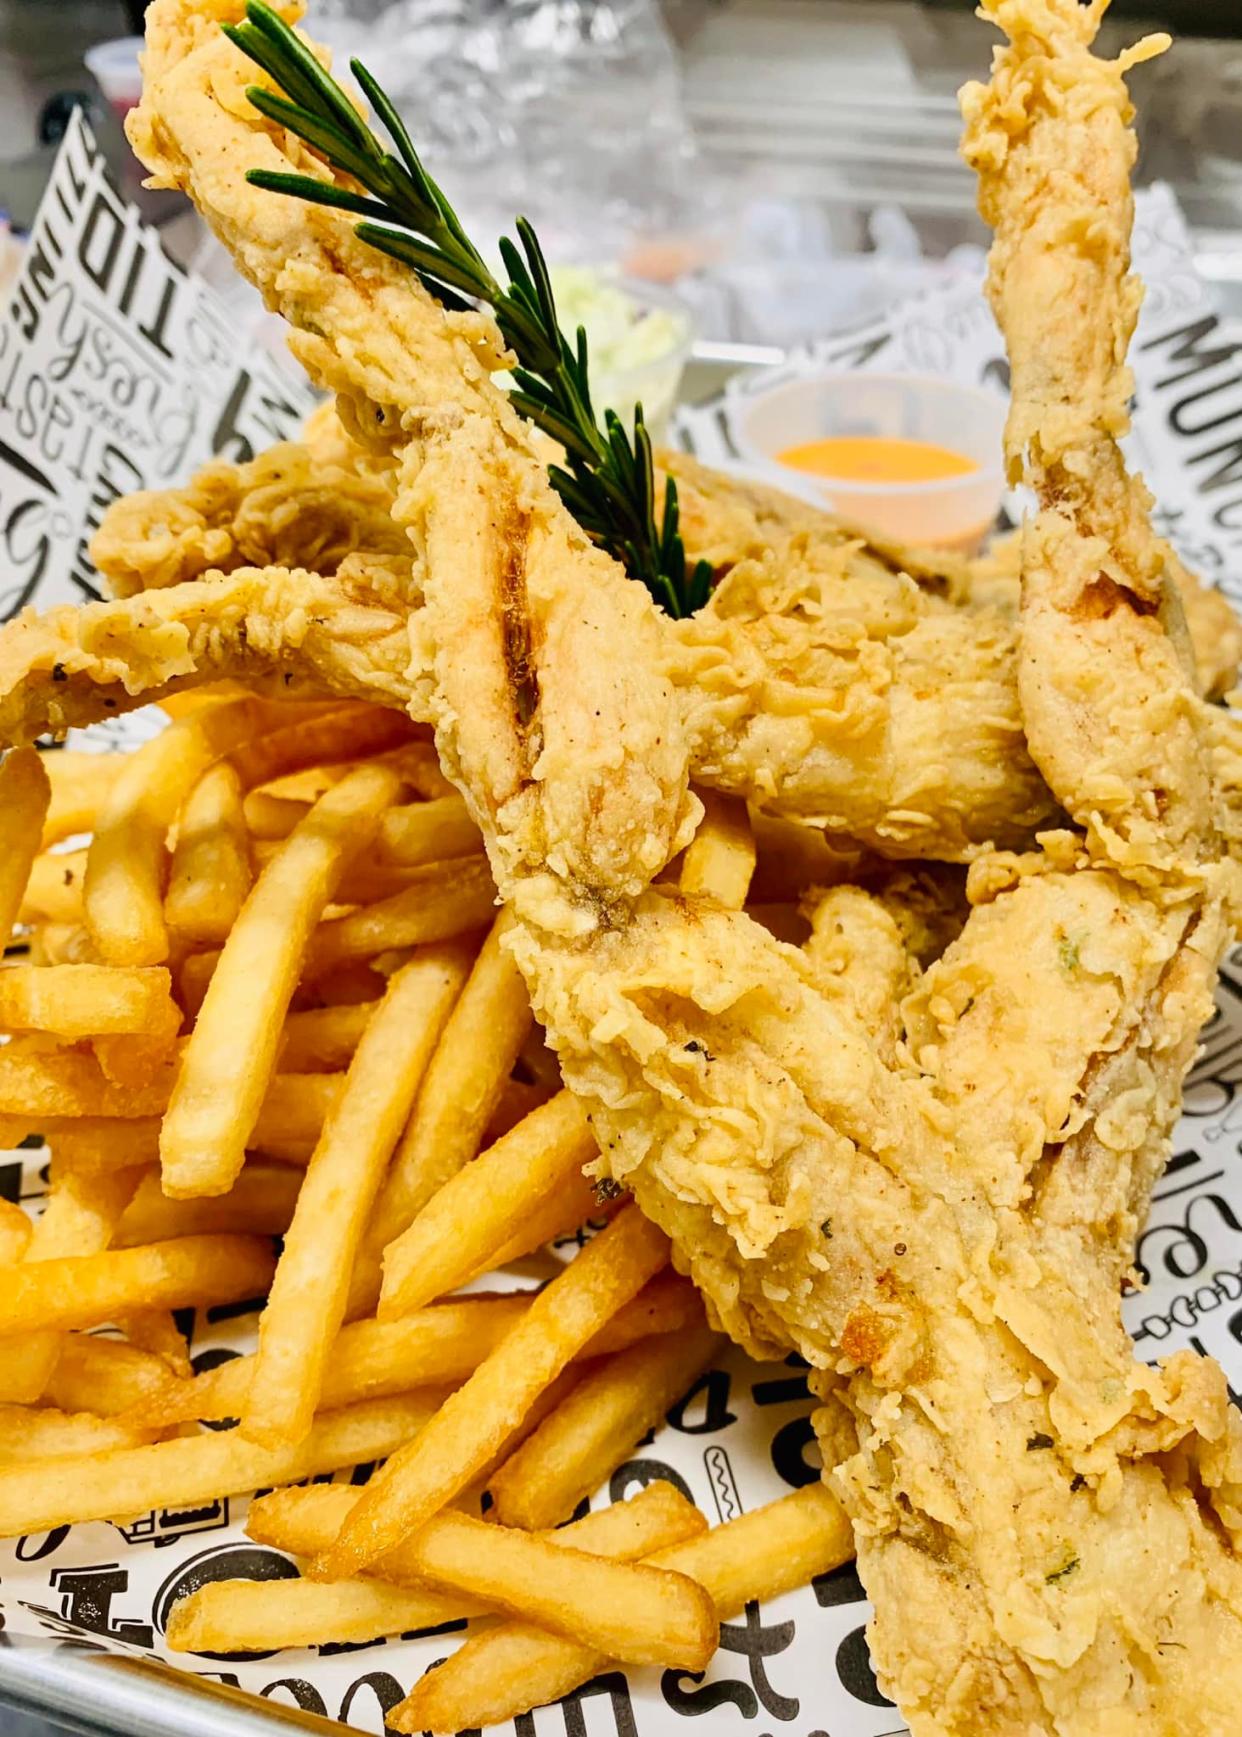 Florida Food Life opened April 4 next to the Shell Bazaar in Port St. Lucie. Its menu features fried frog legs.